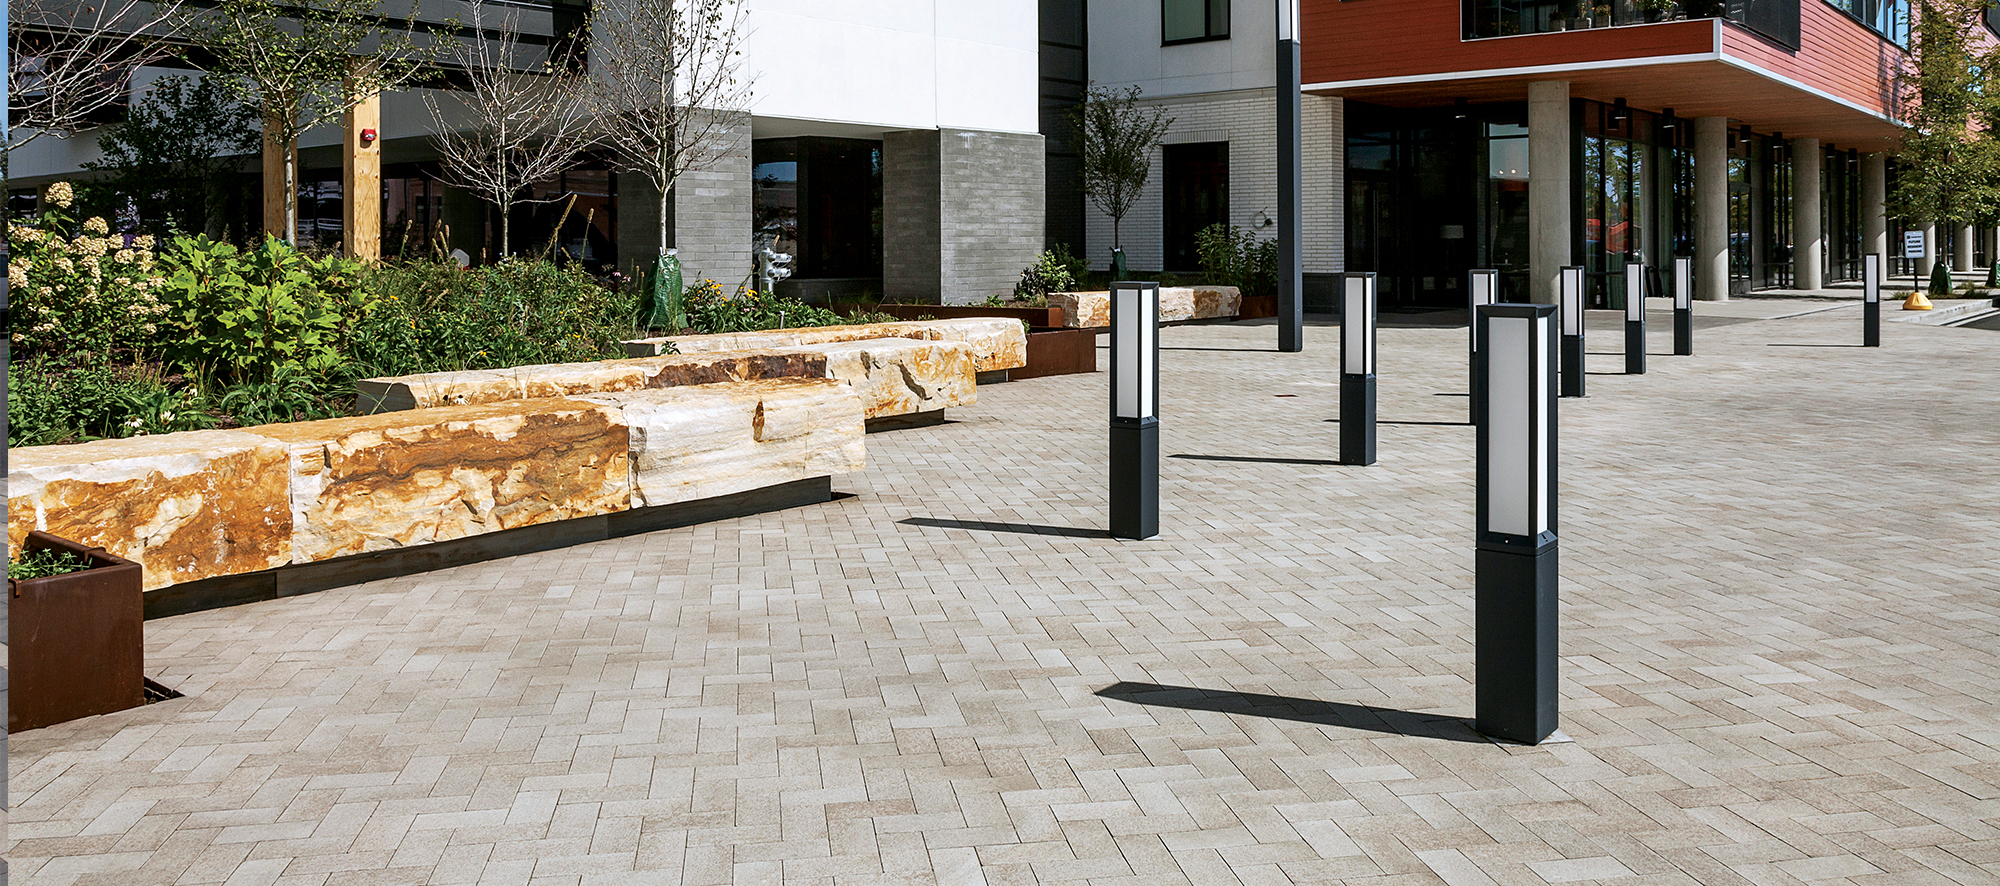 Decorative light posts cast shadows over beige Umbriano pavers, with a retaining wall and garden bed bordering the outside of the complex.